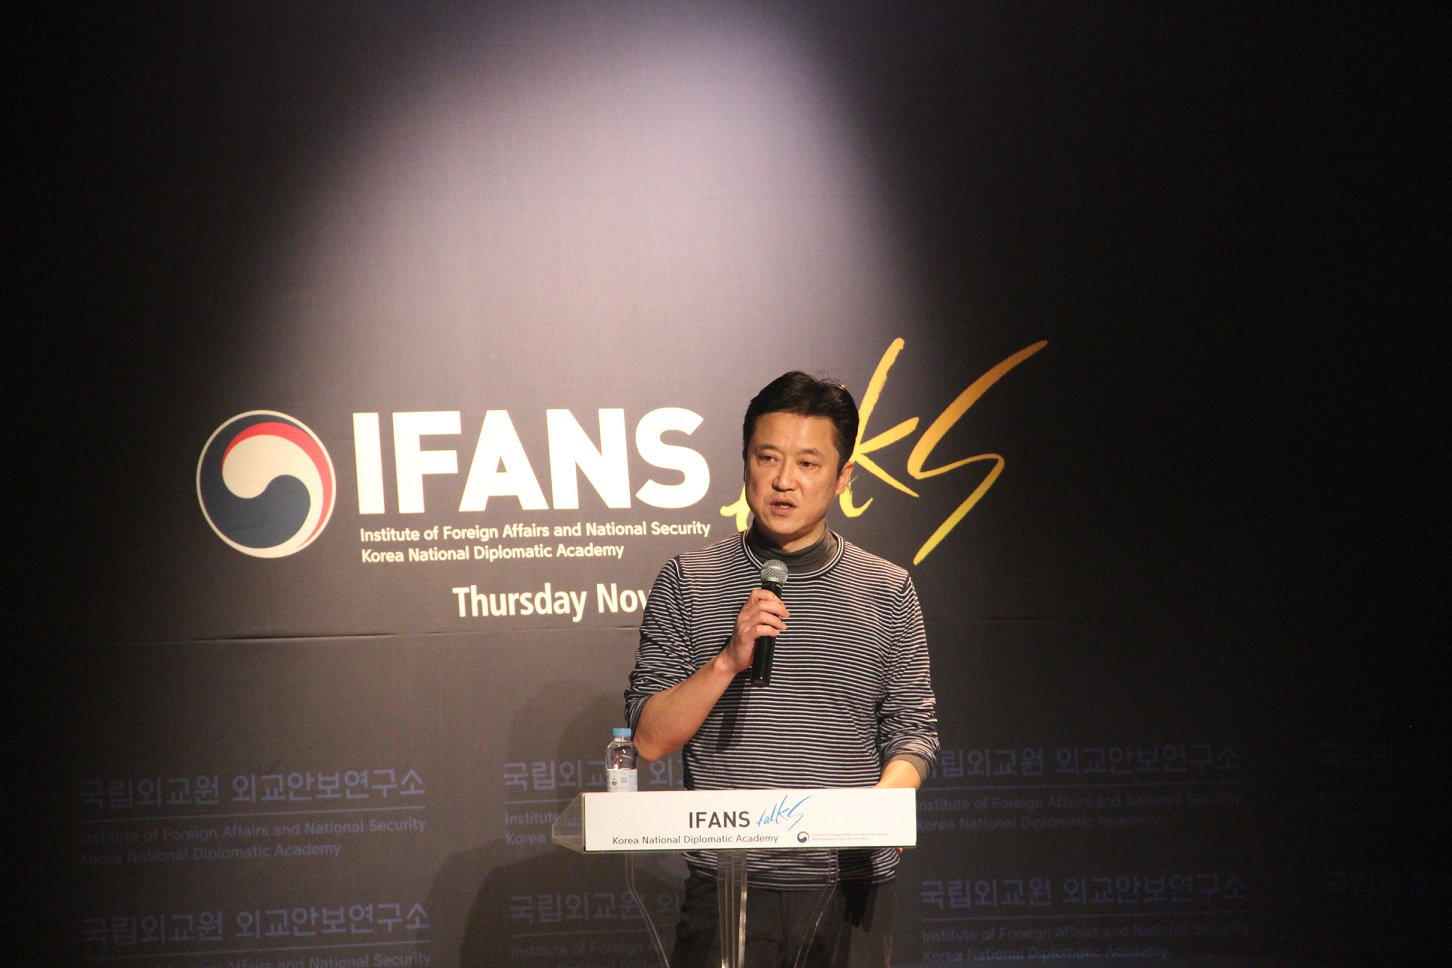 The 18th IFANS TALKS